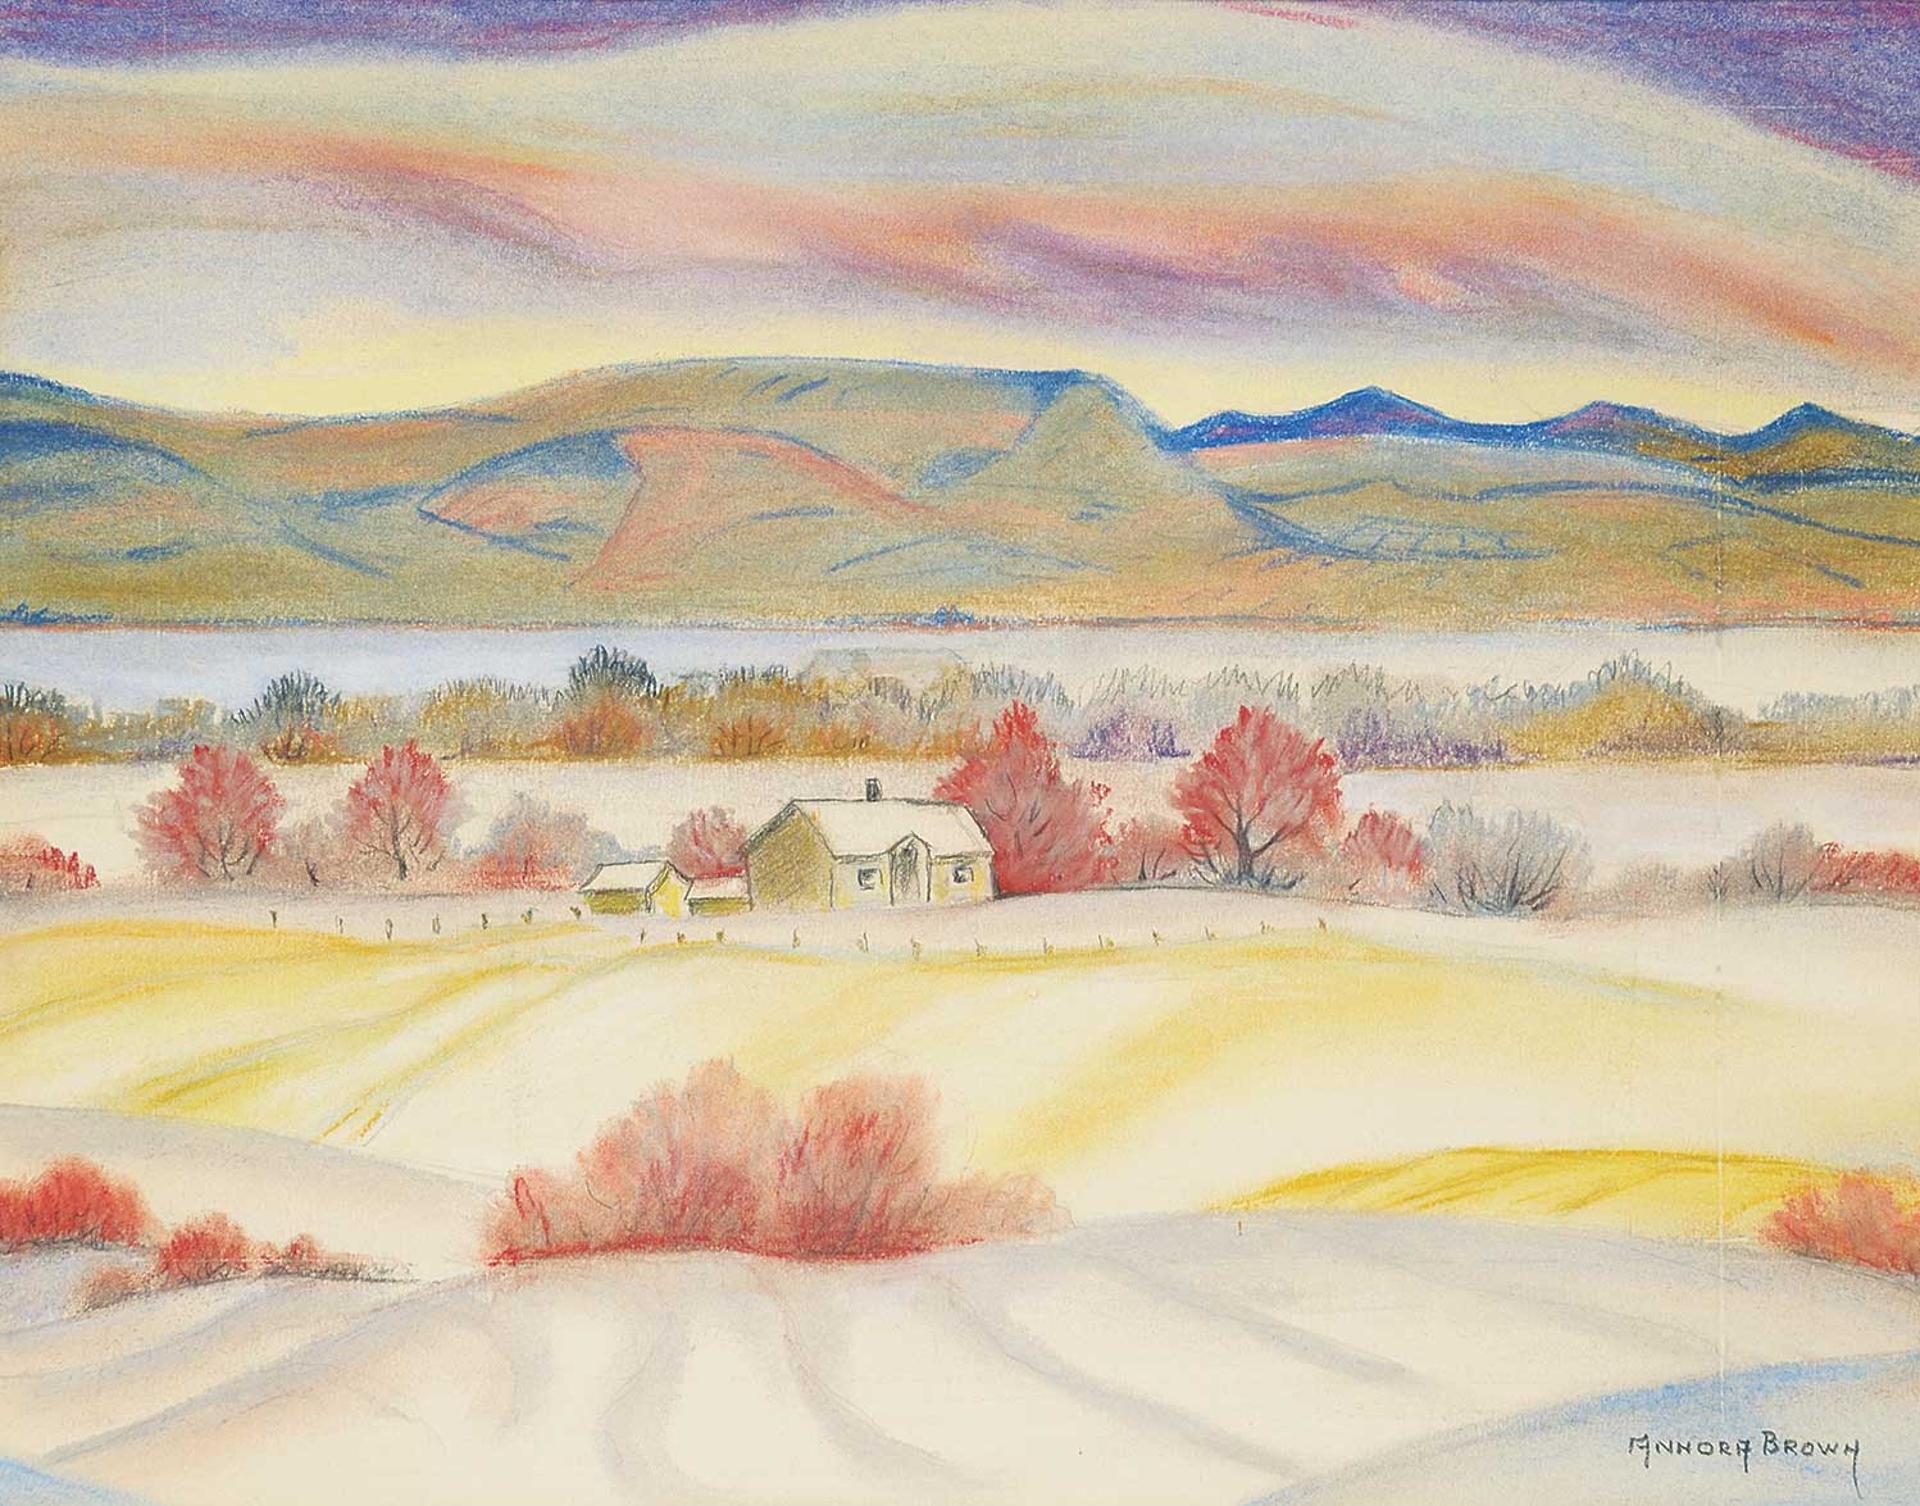 Annora Brown (1899-1987) - Untitled - Farmhouse by the Lake